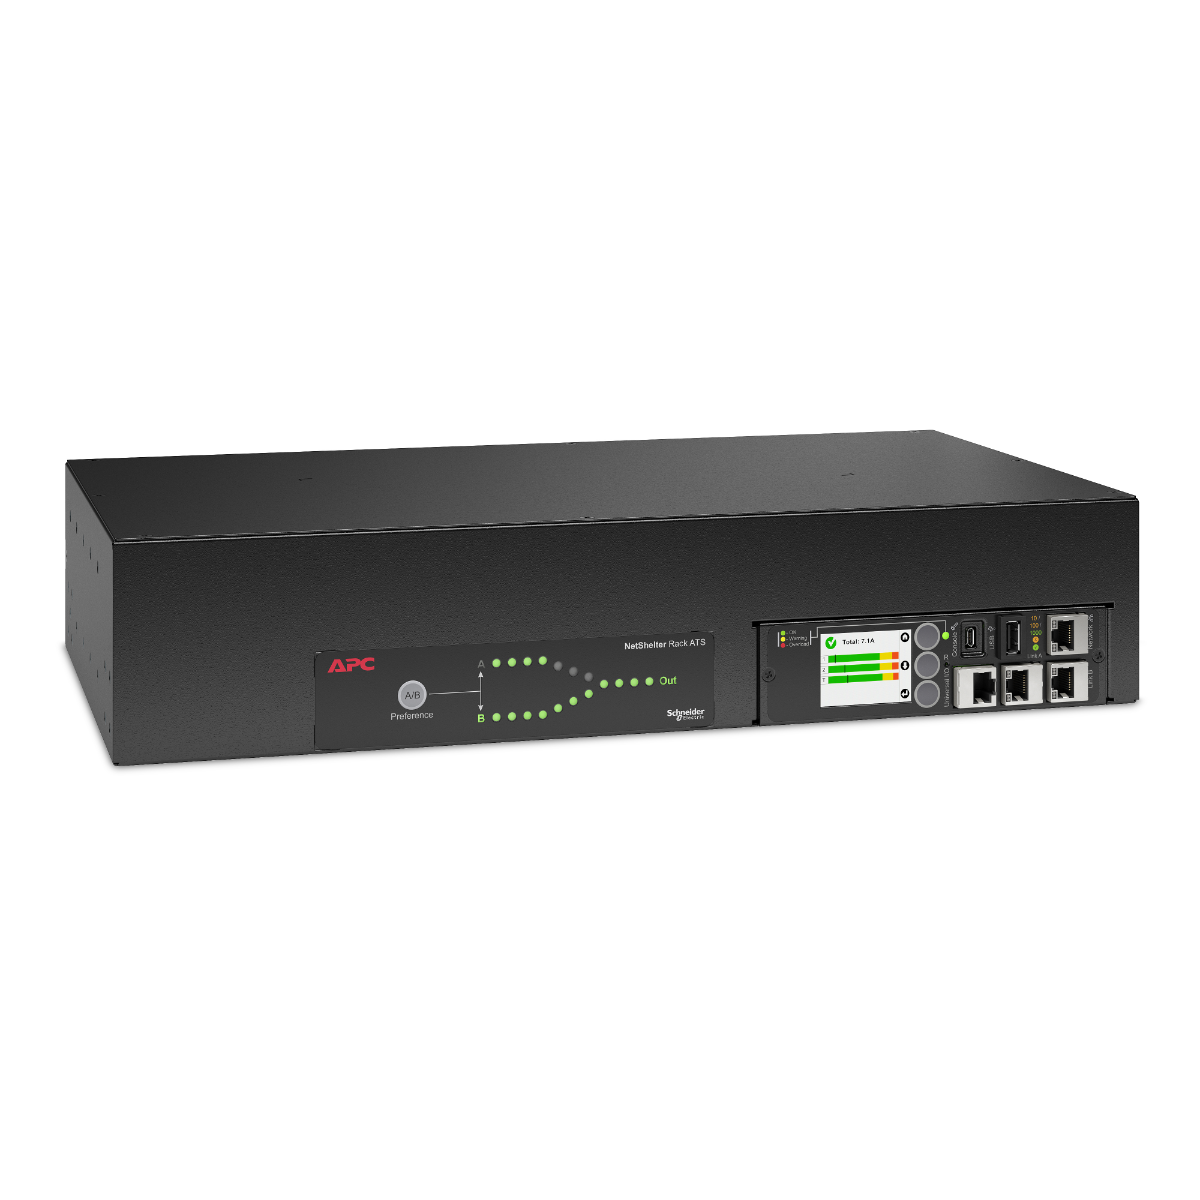 APC NetShelter Metered Rack PDU, 0U, 1PH, 7.4kW 230V 32A, x36 C13 and x6 C19 outlets, IEC 309 2P+E cord